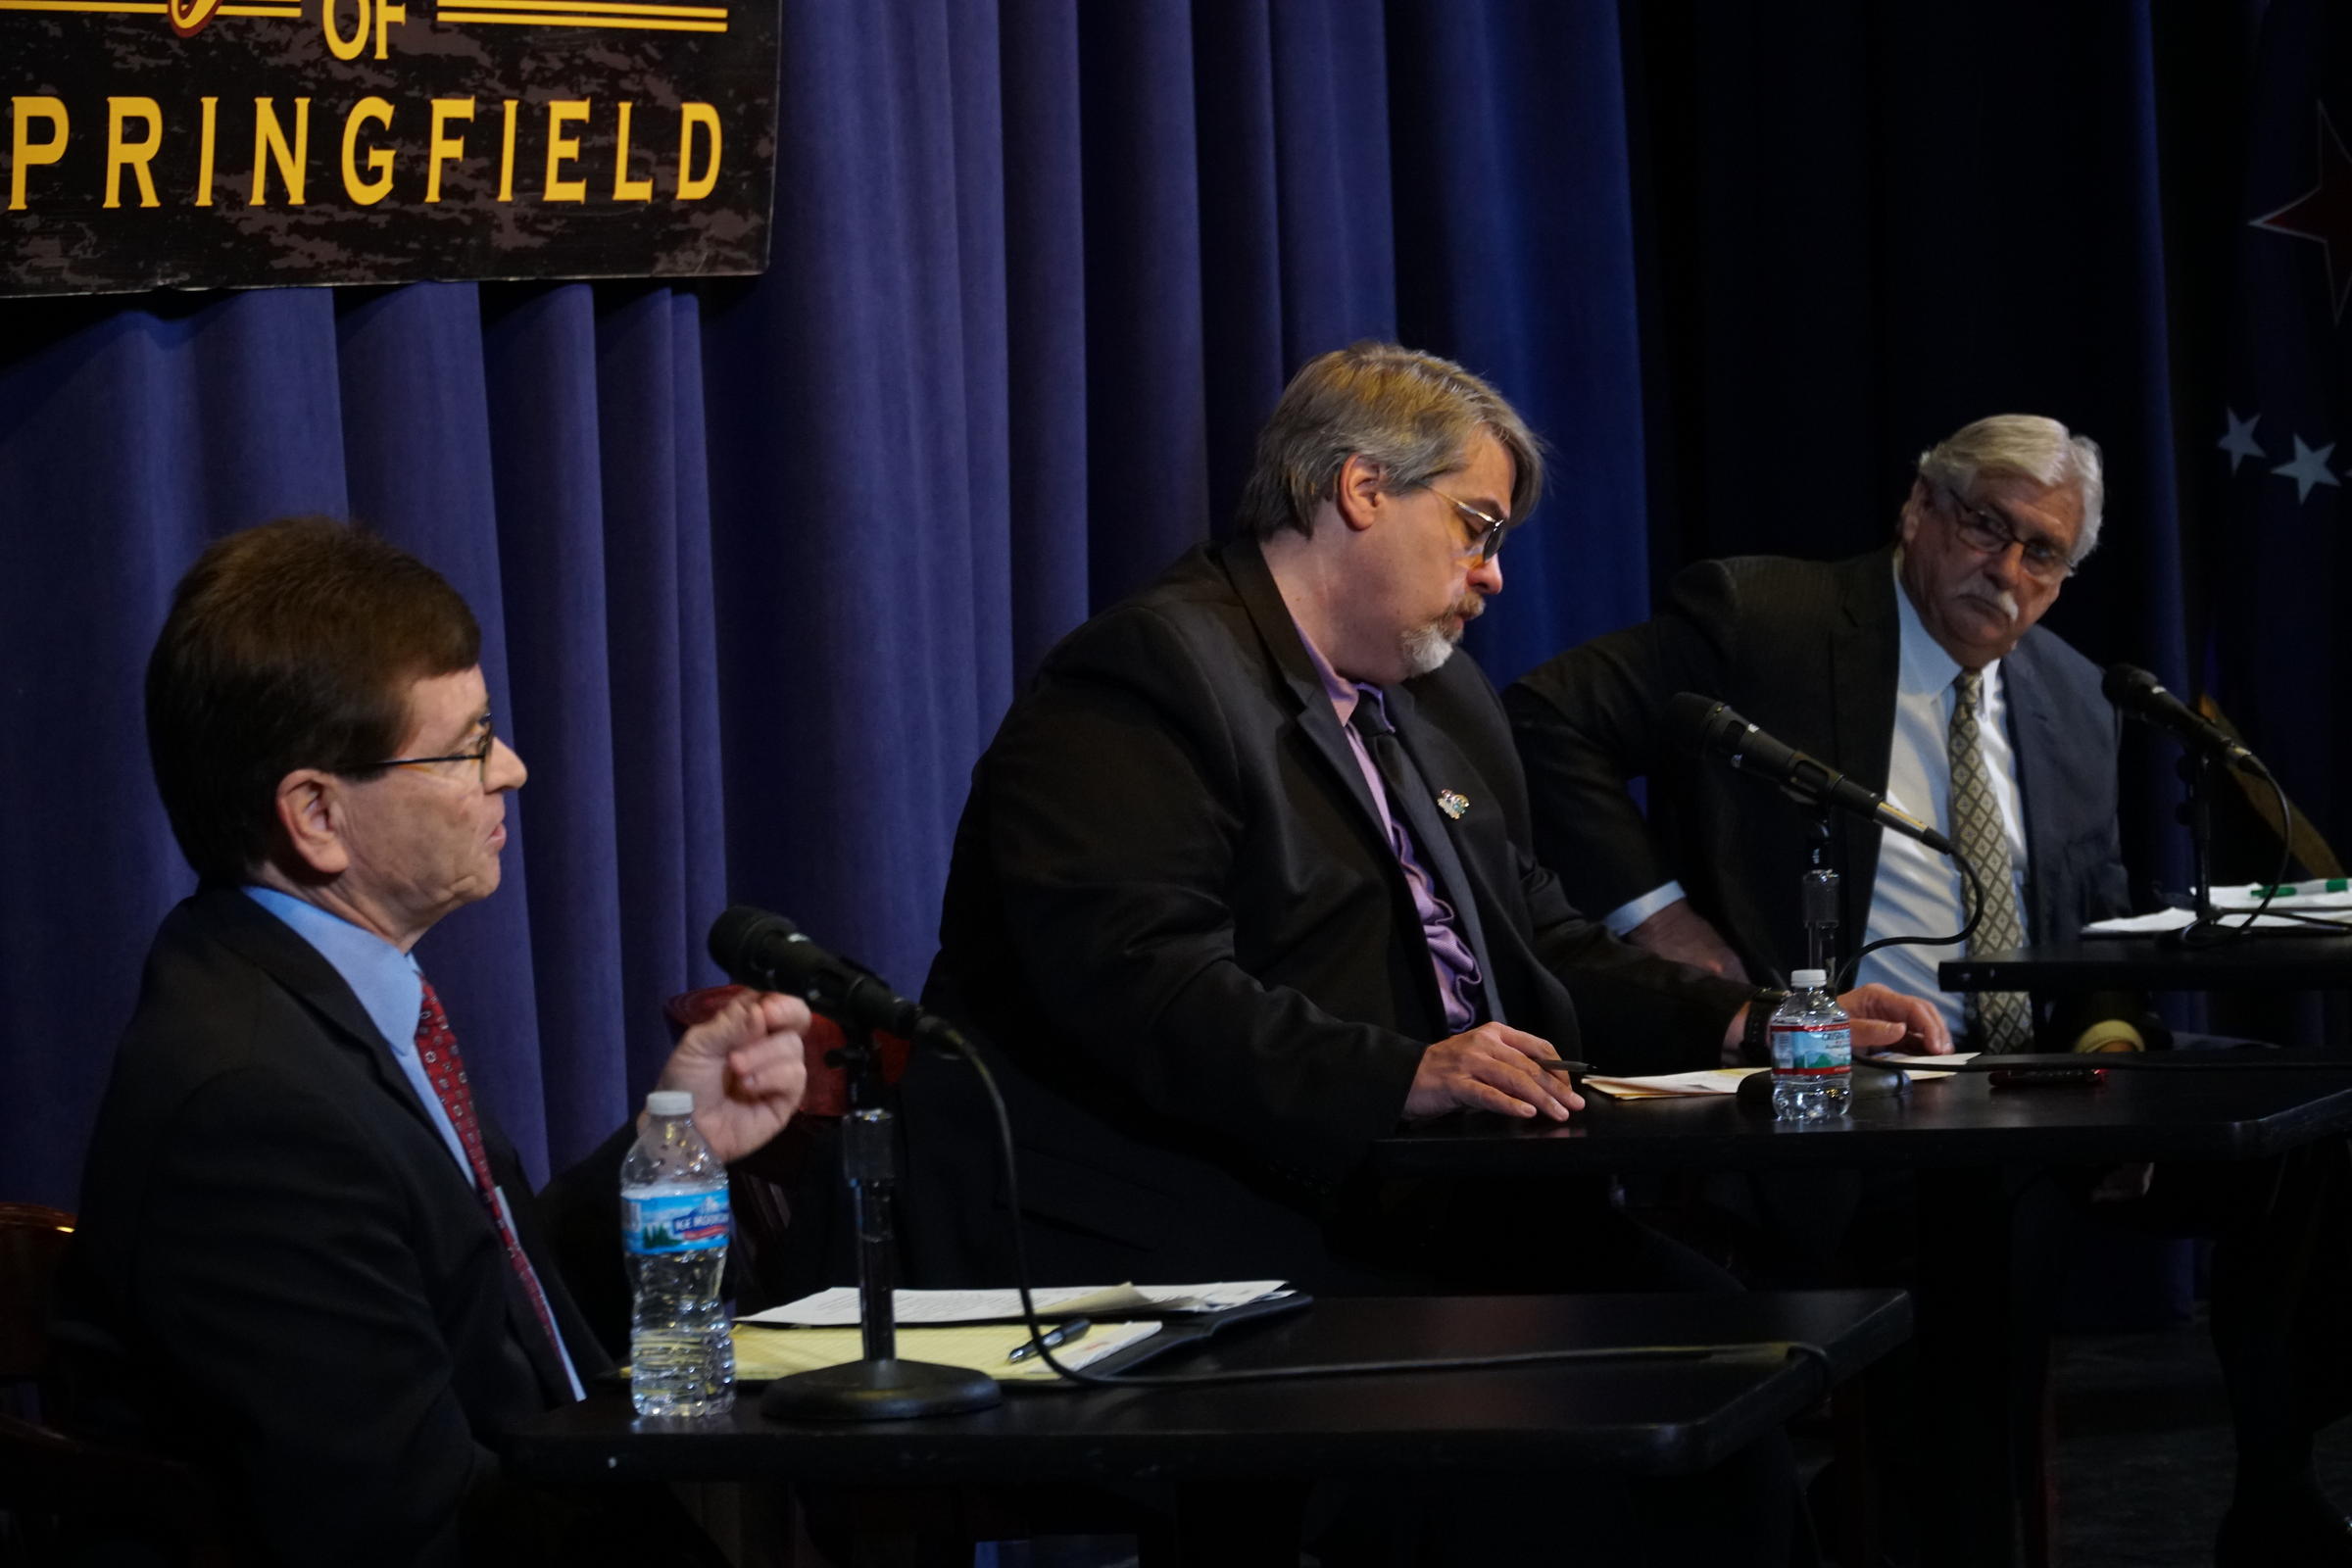 Same City, Different Visions Springfield Mayoral Candidates Square Off